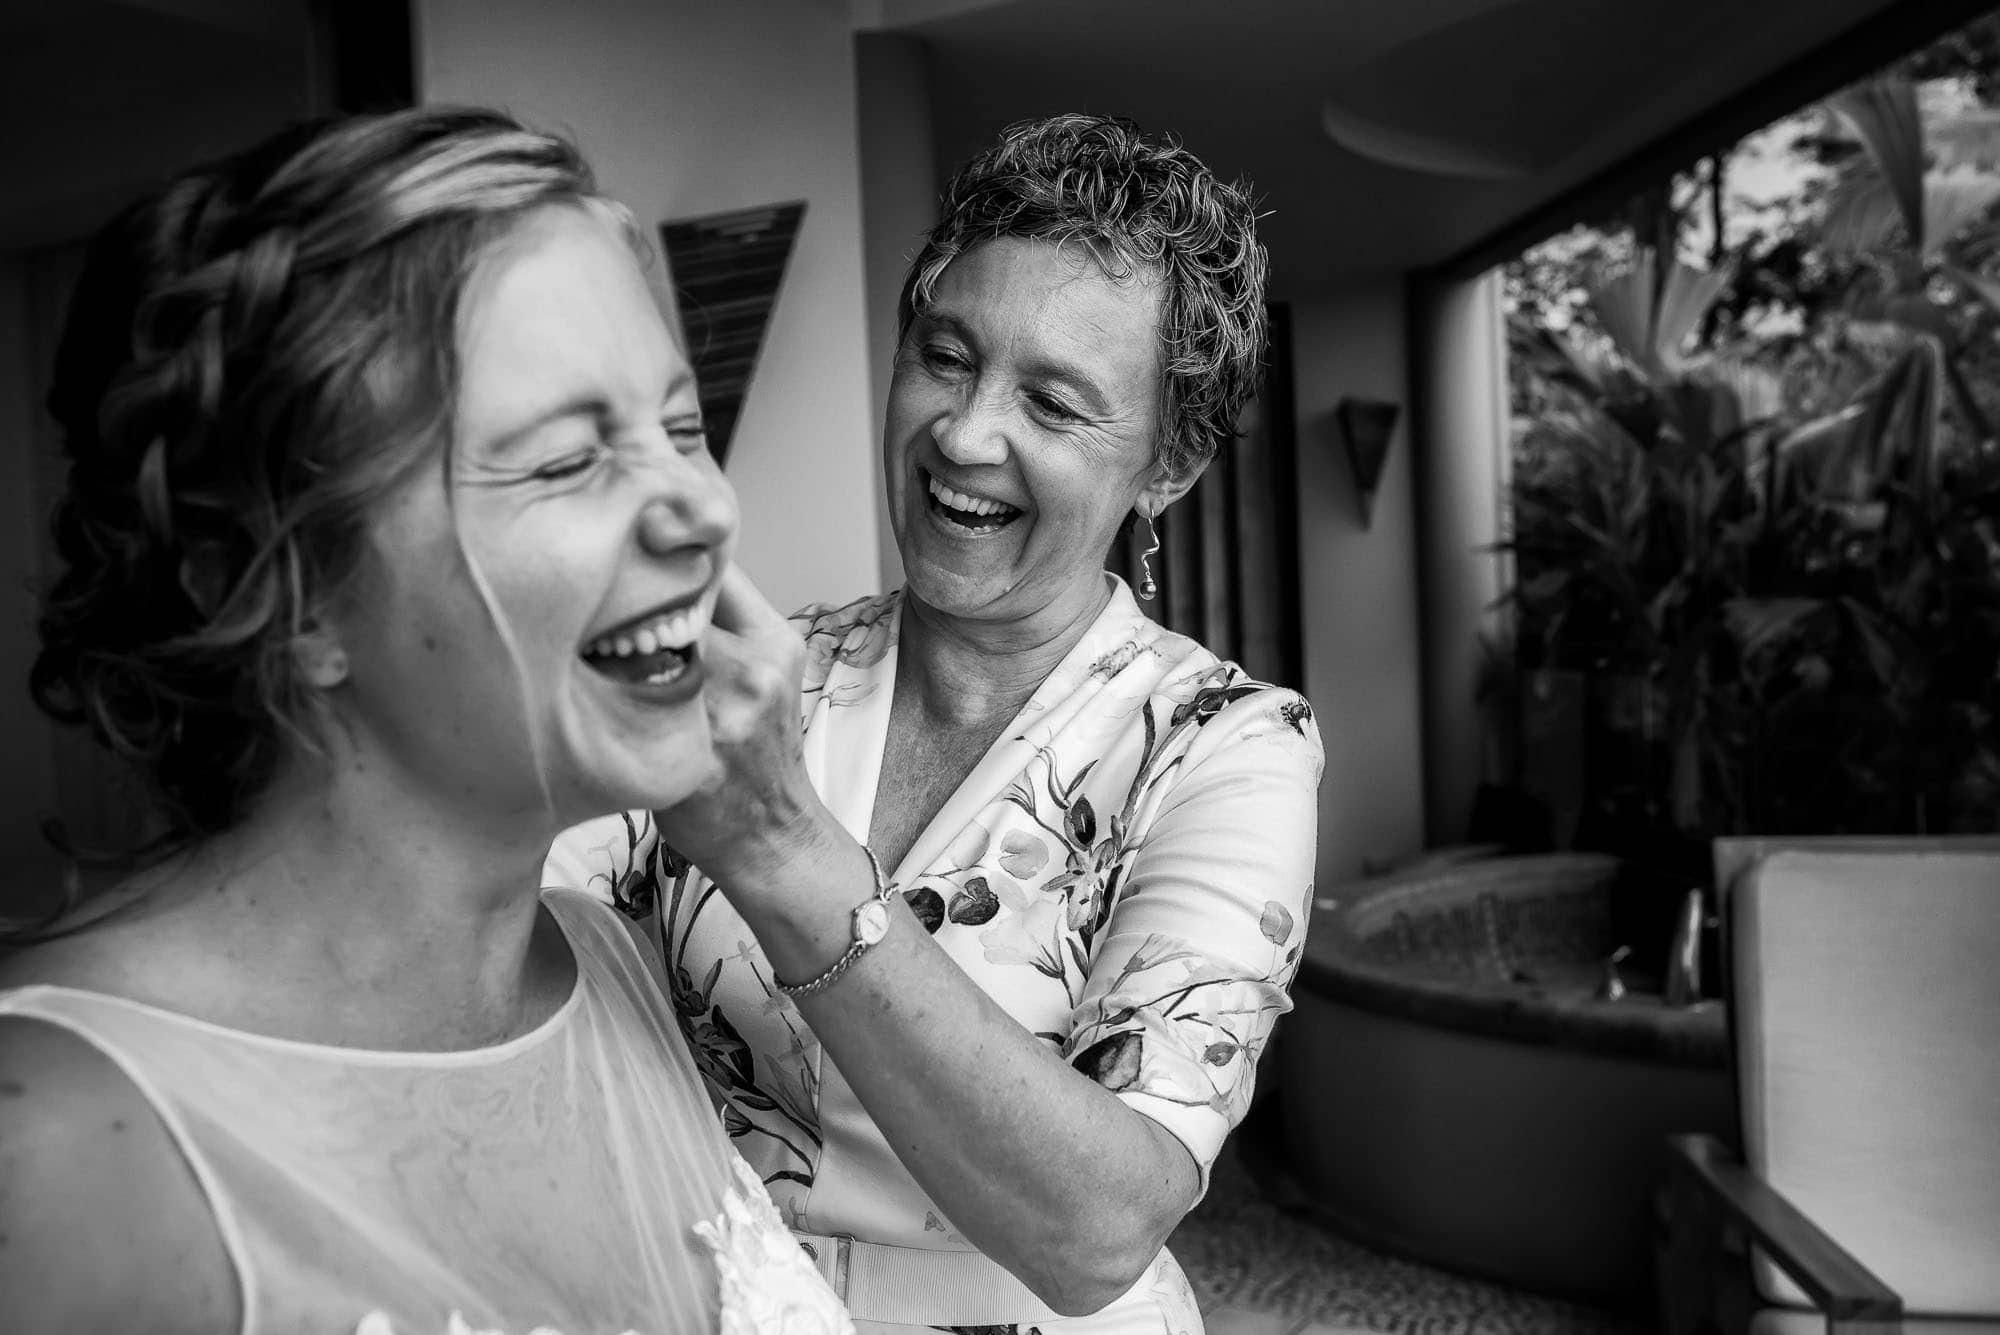 Mom laughing with the bride as she gets ready to get married